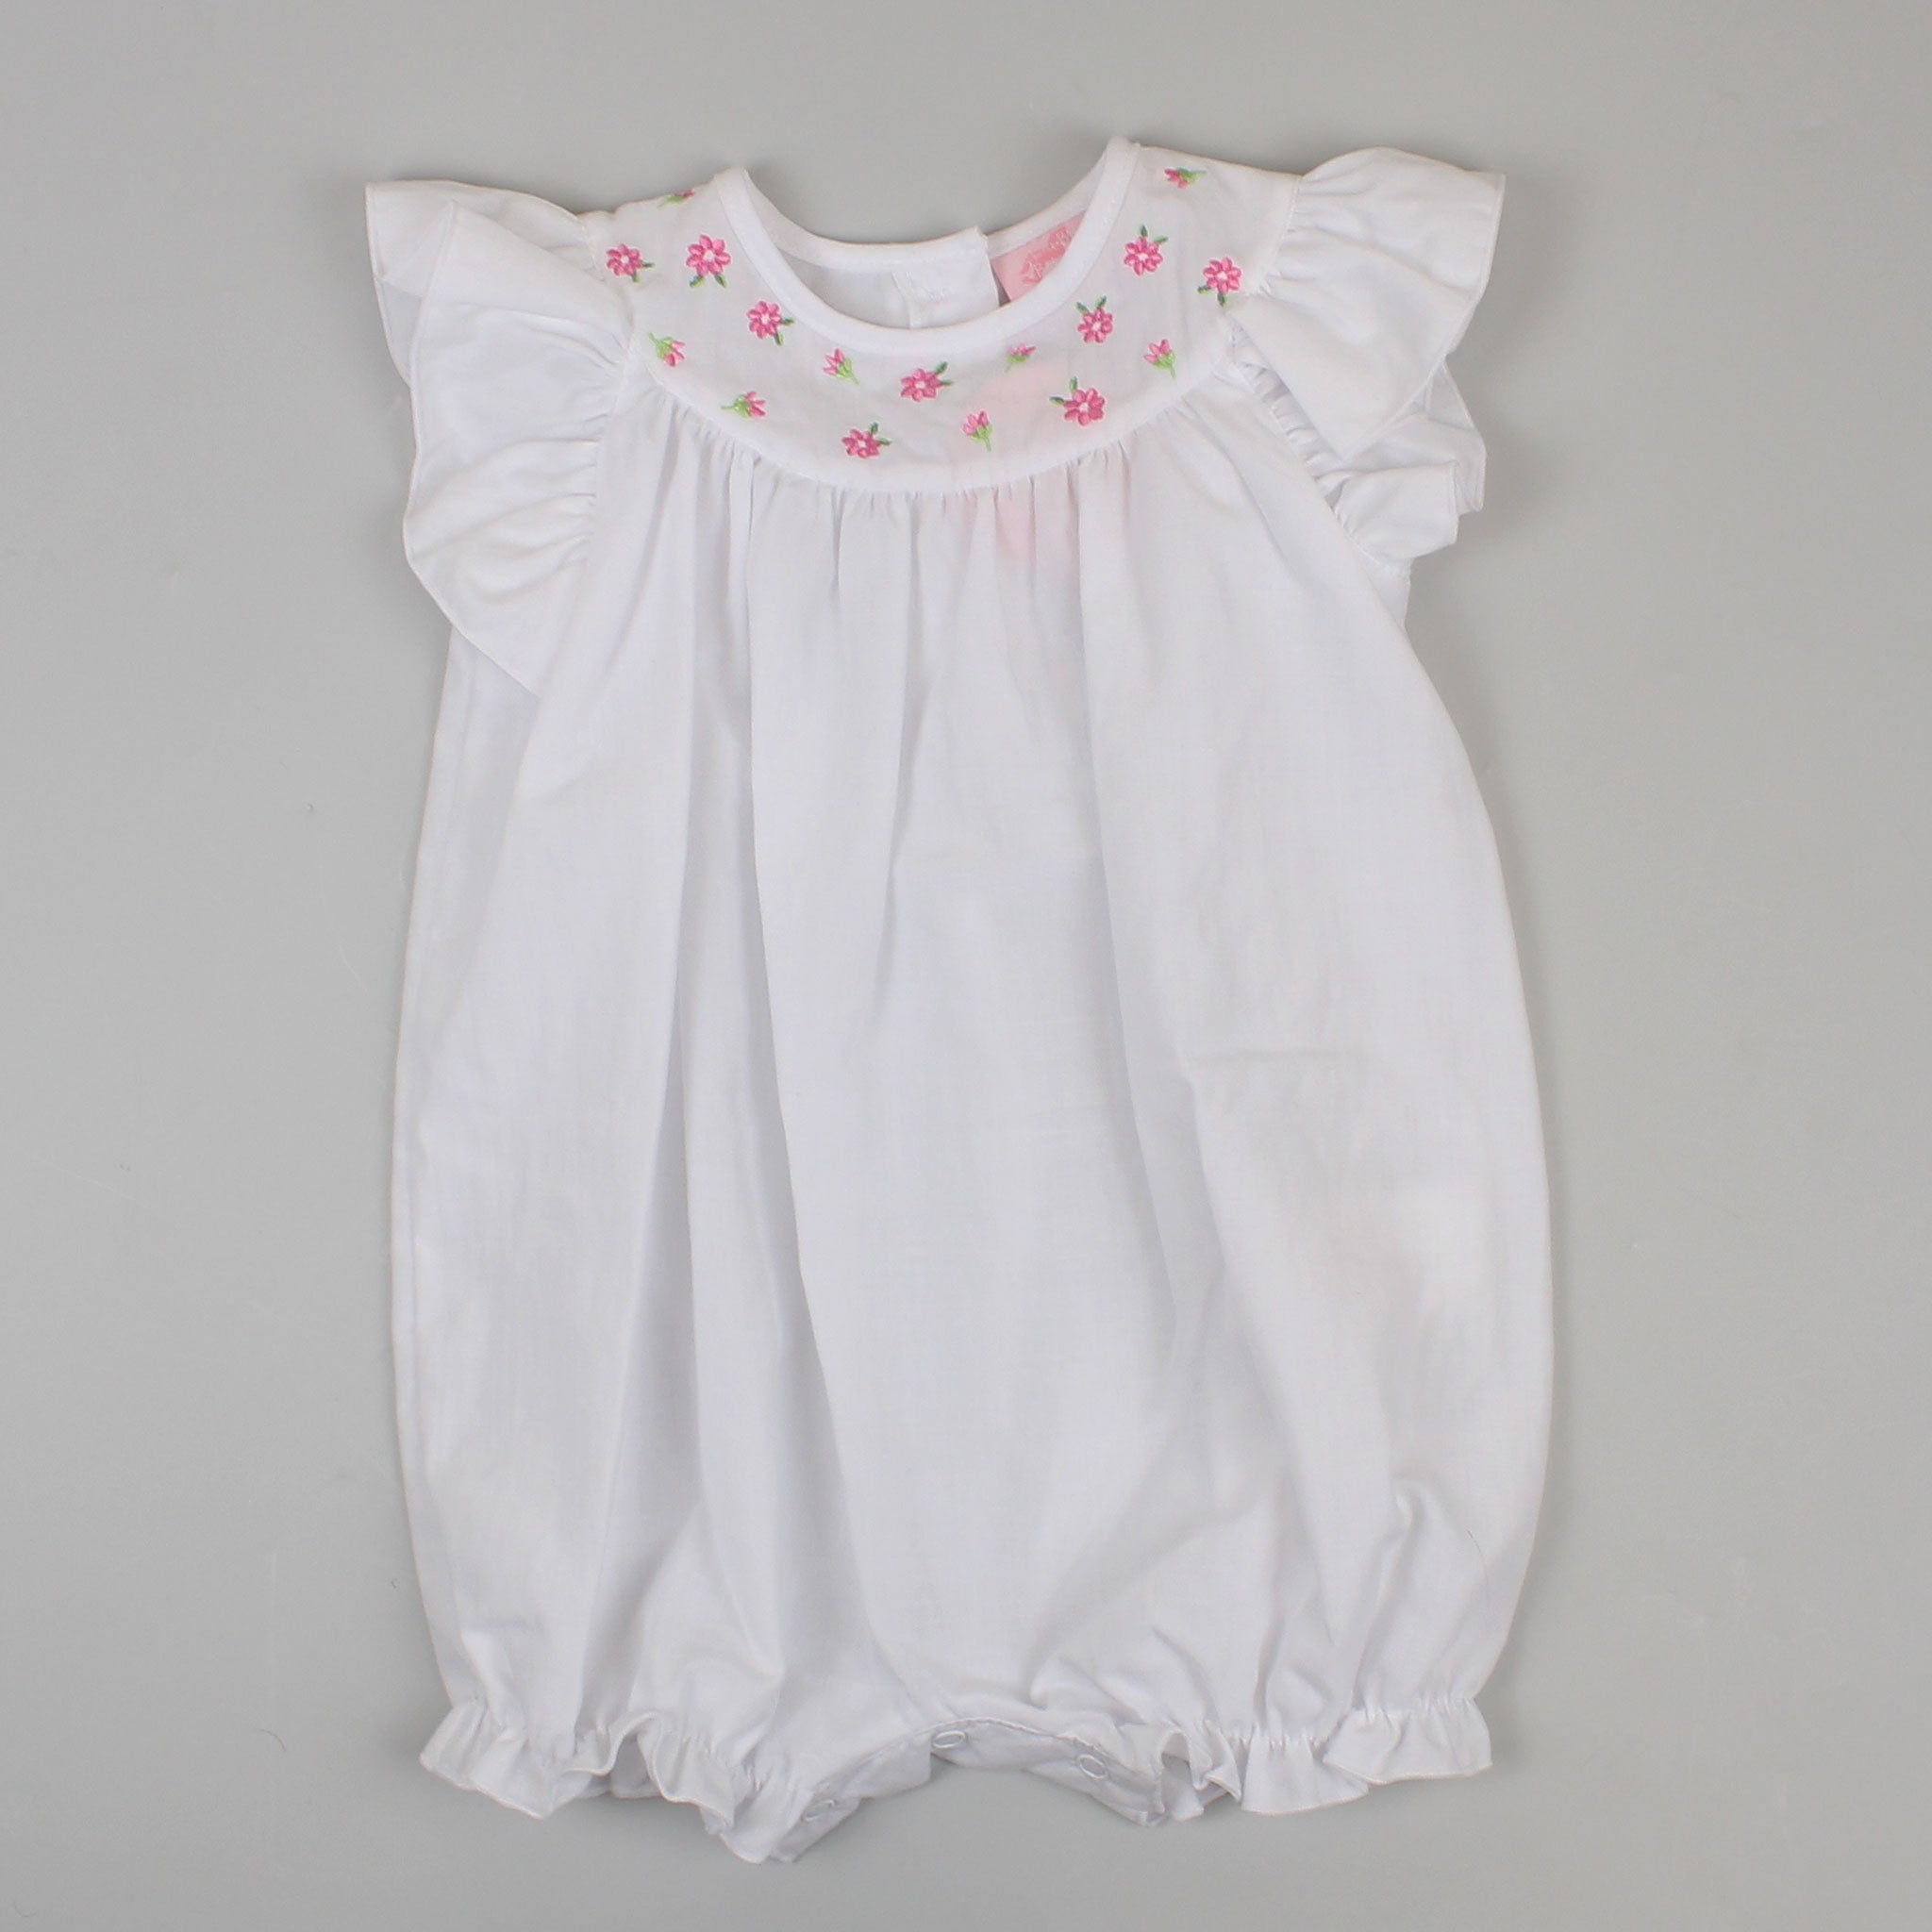 baby girls white summer outfit with flowers